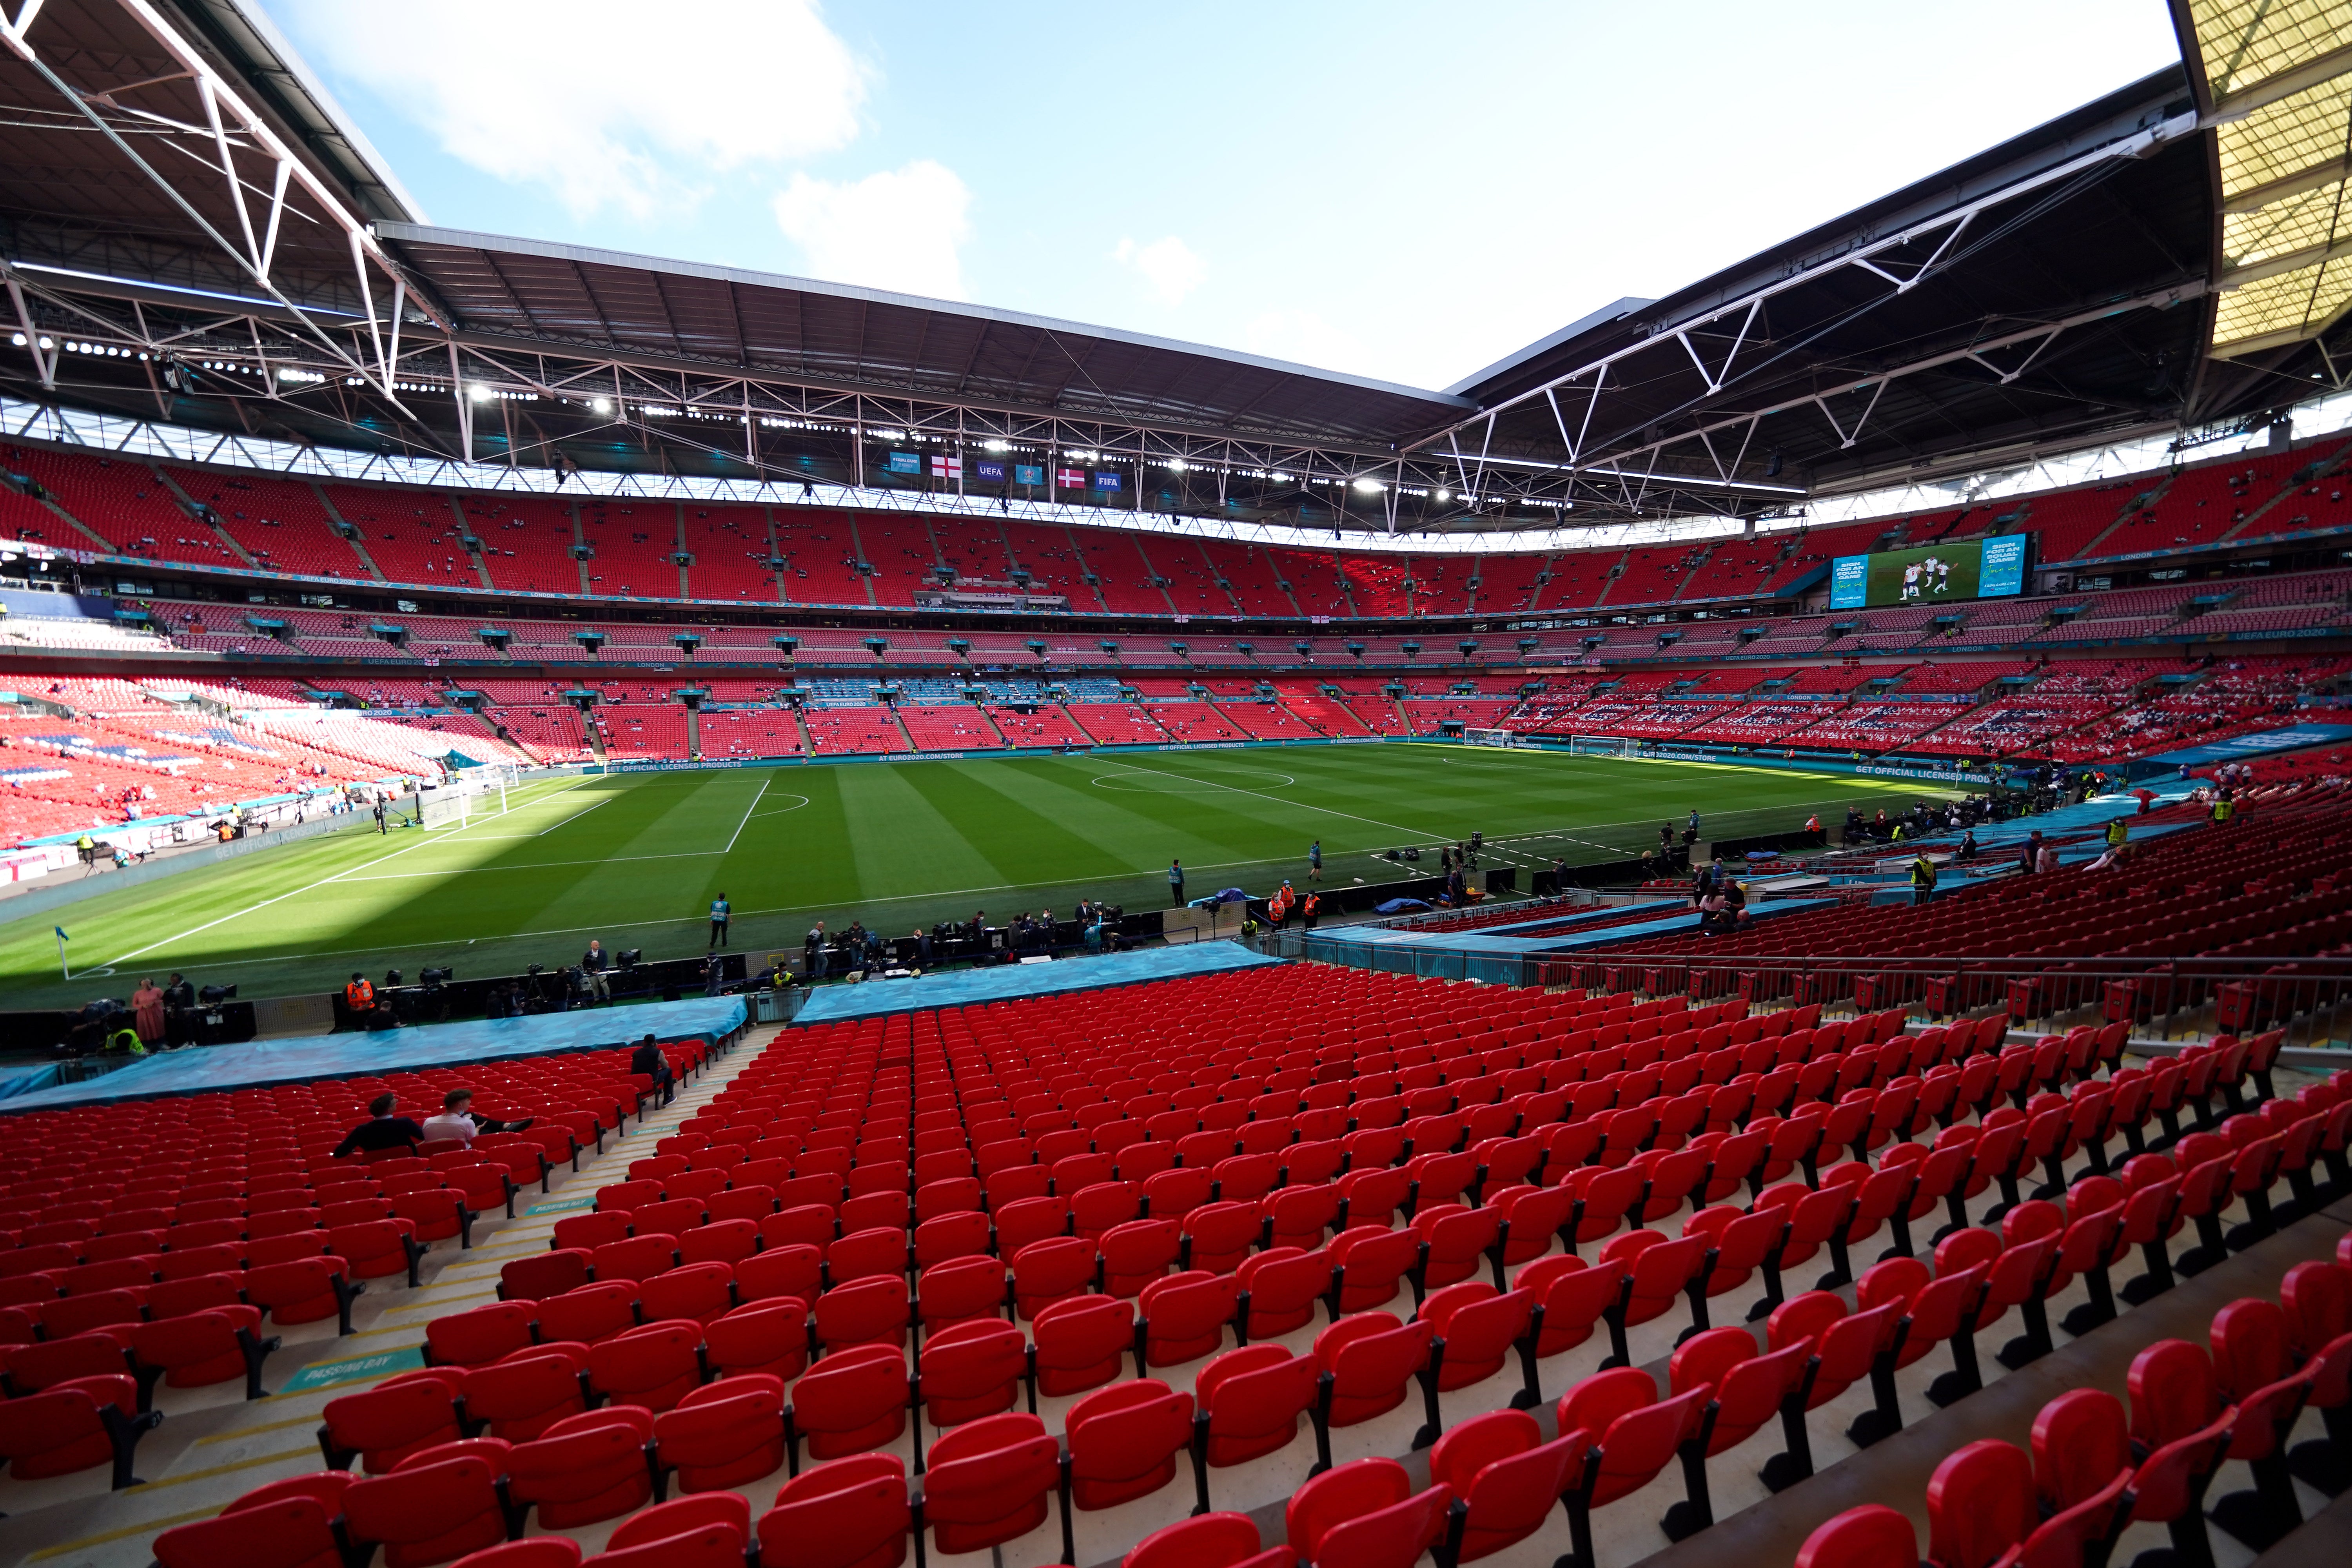 There have been calls for the FA Cup semi-final between Manchester City and Liverpool to be moved from Wembley (Mike Egerton/PA)